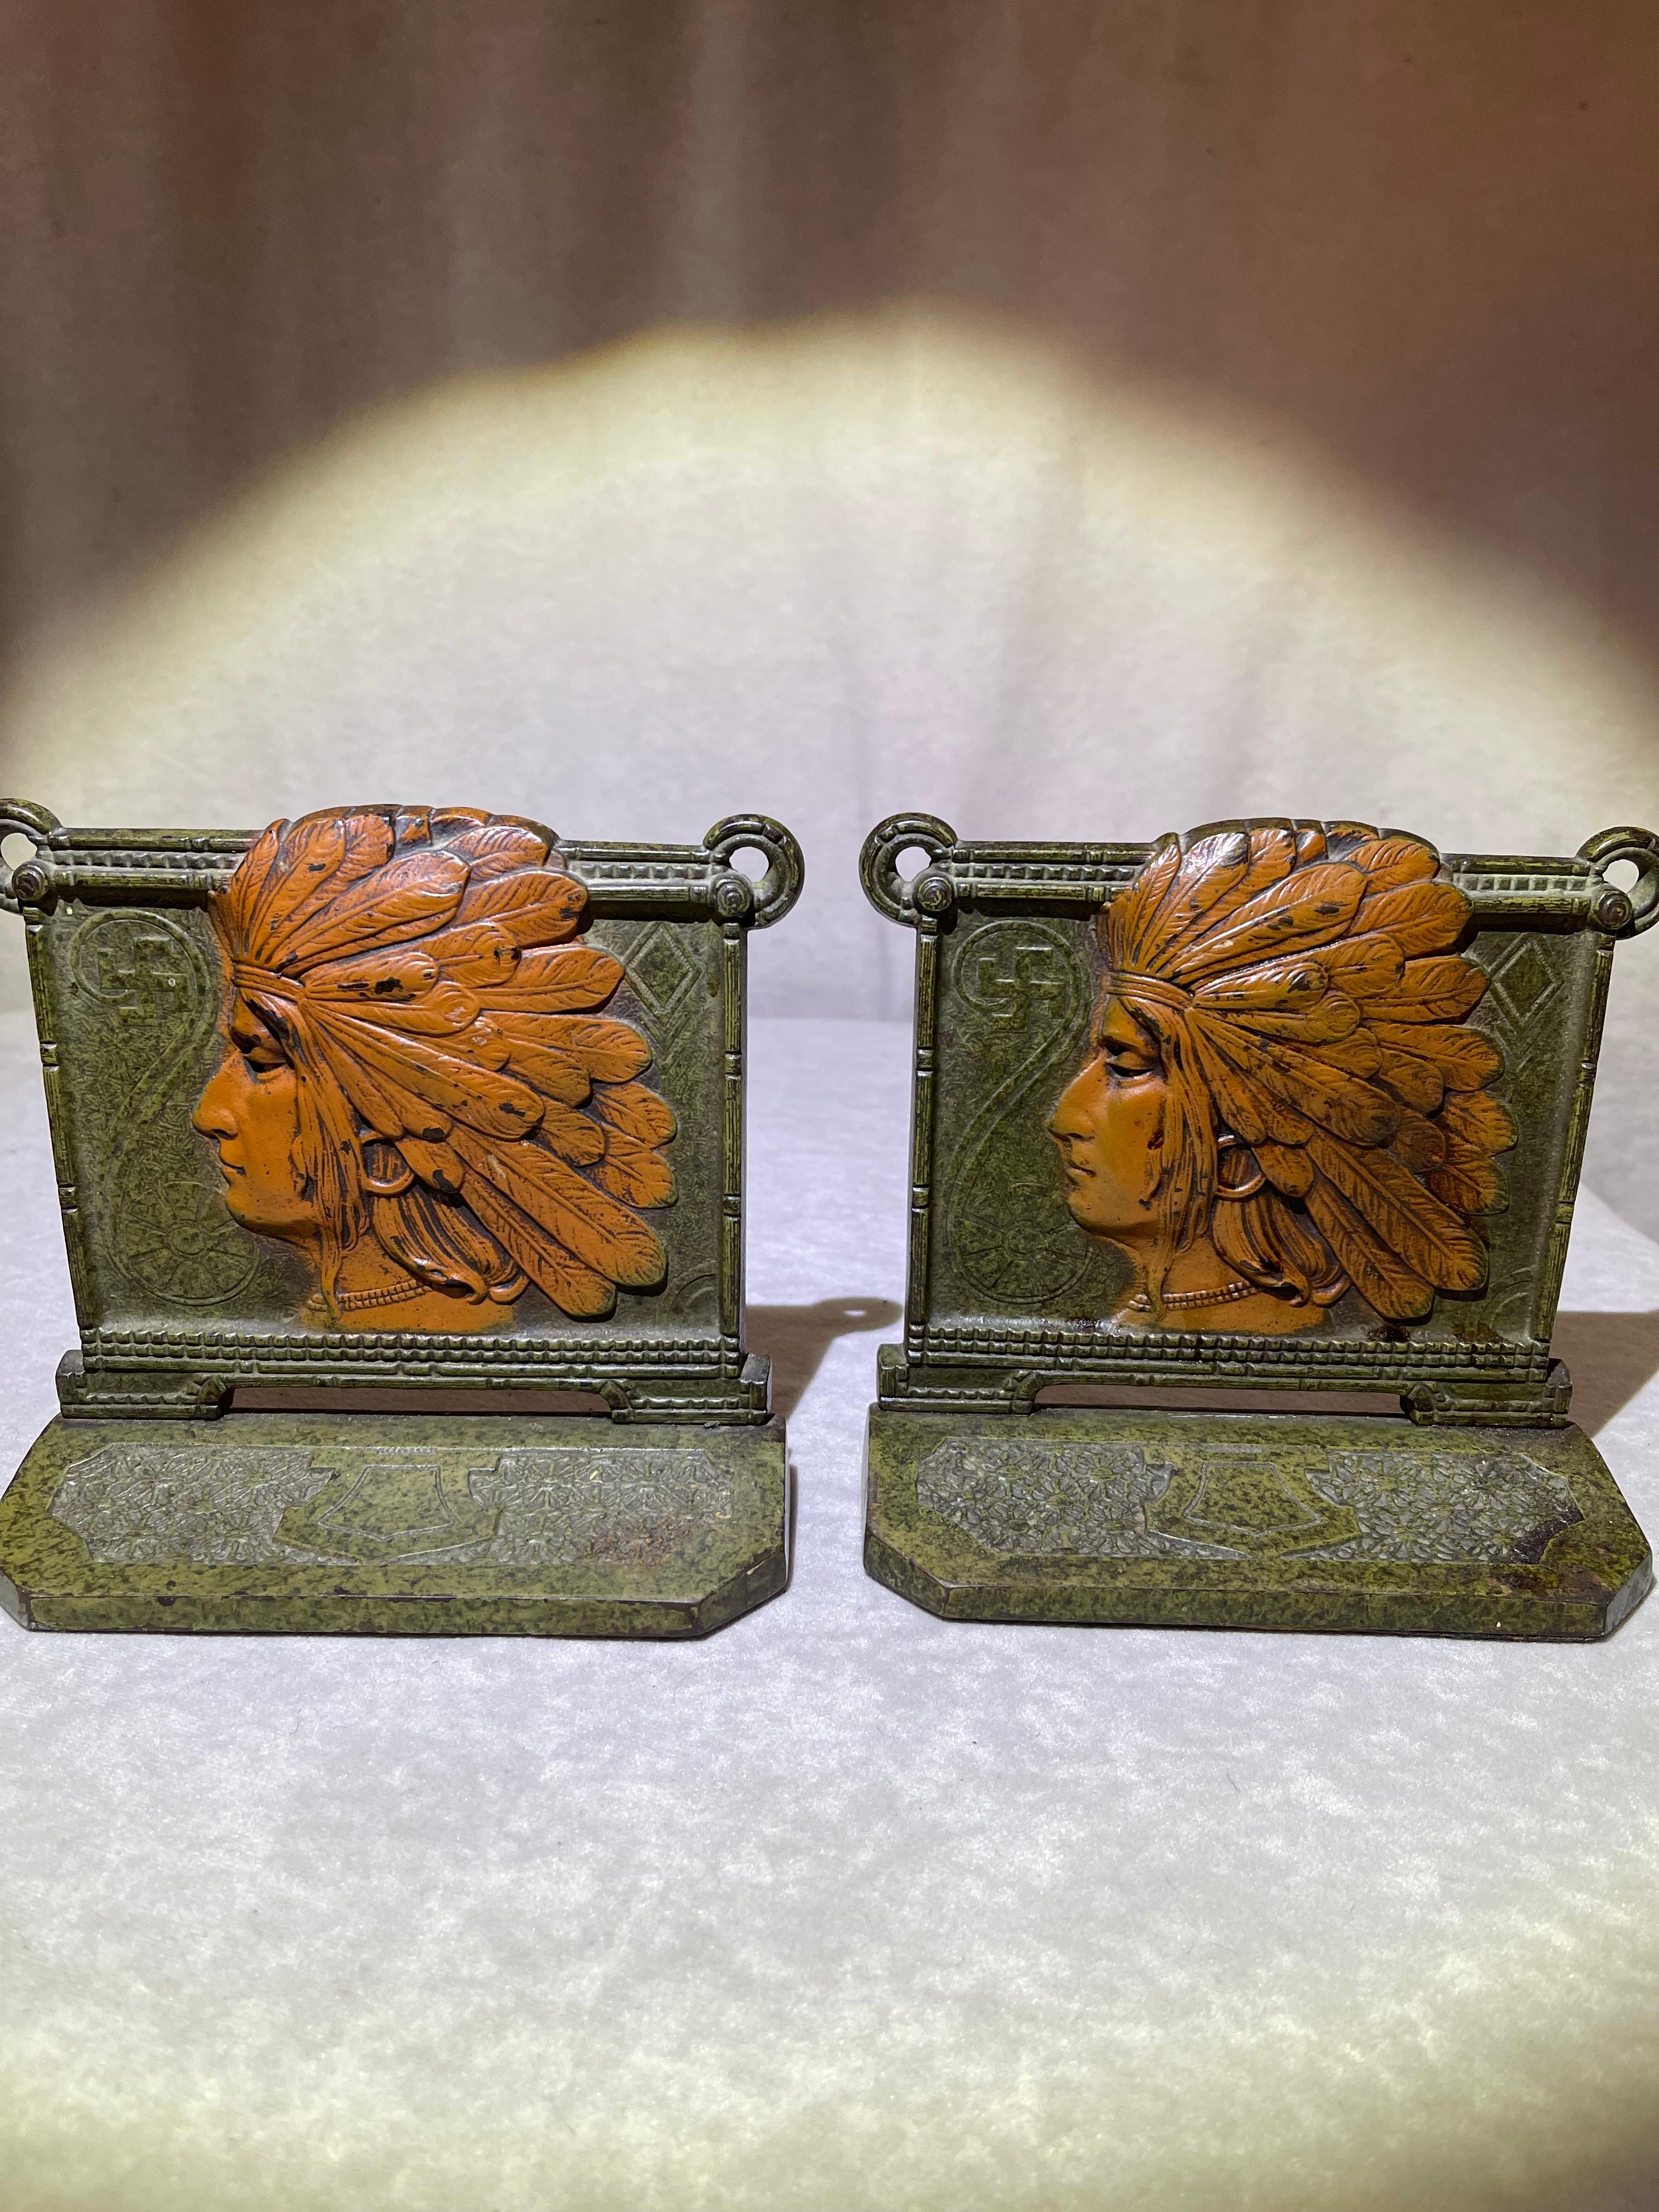 These exceptionally high quality cast iron bookends were made by the Judd Company, which has a rich history dating back to 1833. The detail, the authentic paint, and even the back of these are all really the very best quality. These are very heavy,